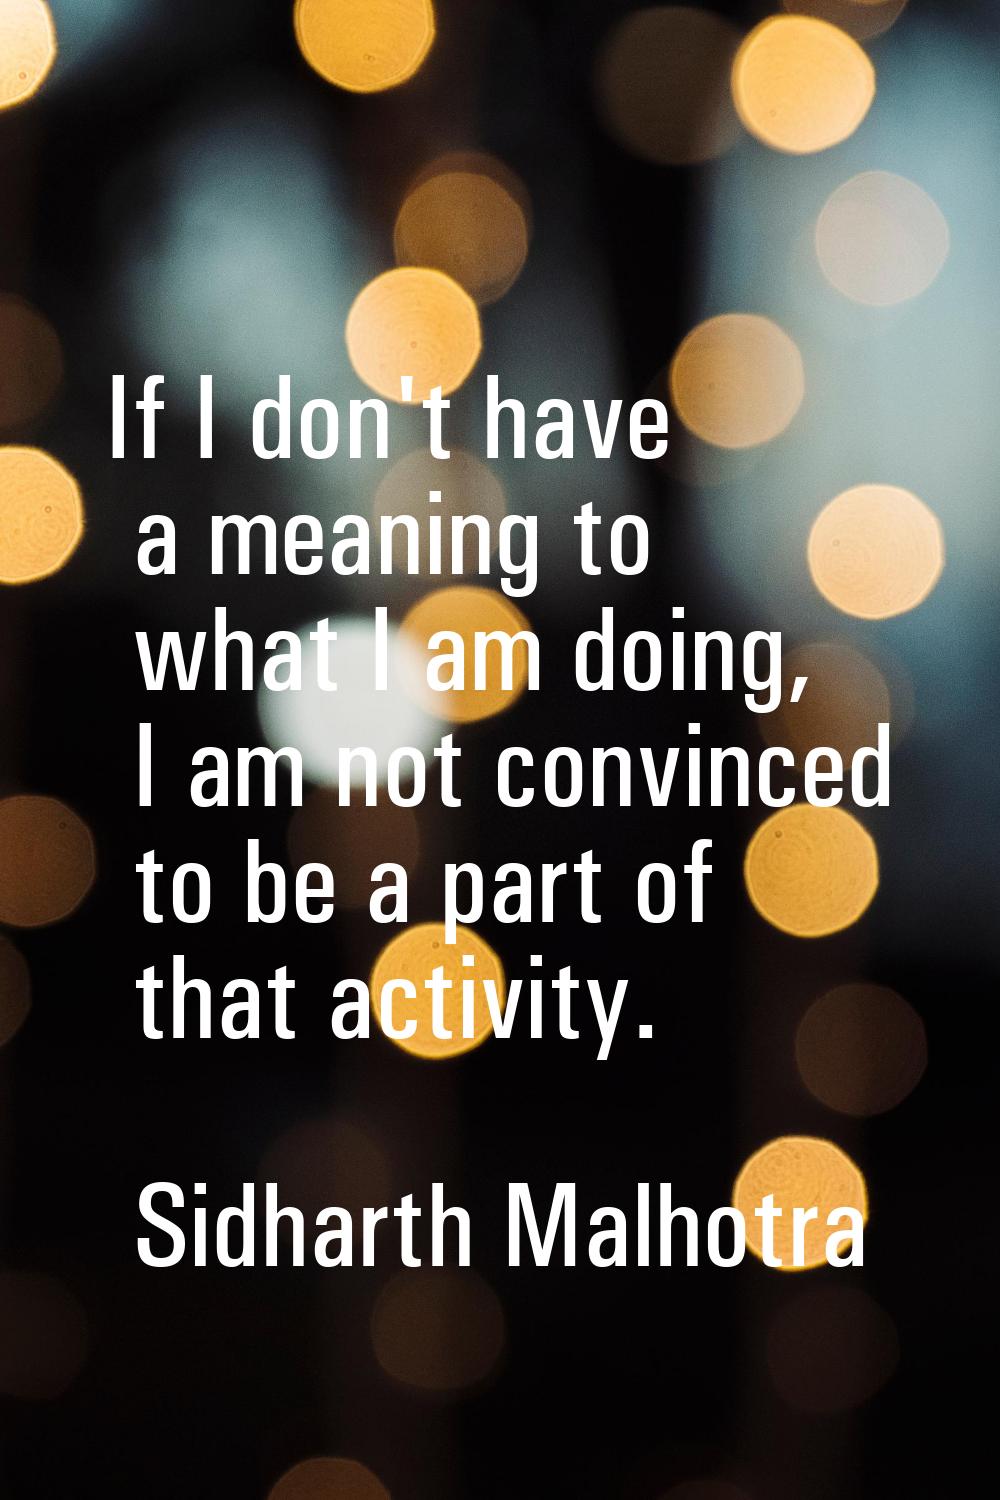 If I don't have a meaning to what I am doing, I am not convinced to be a part of that activity.